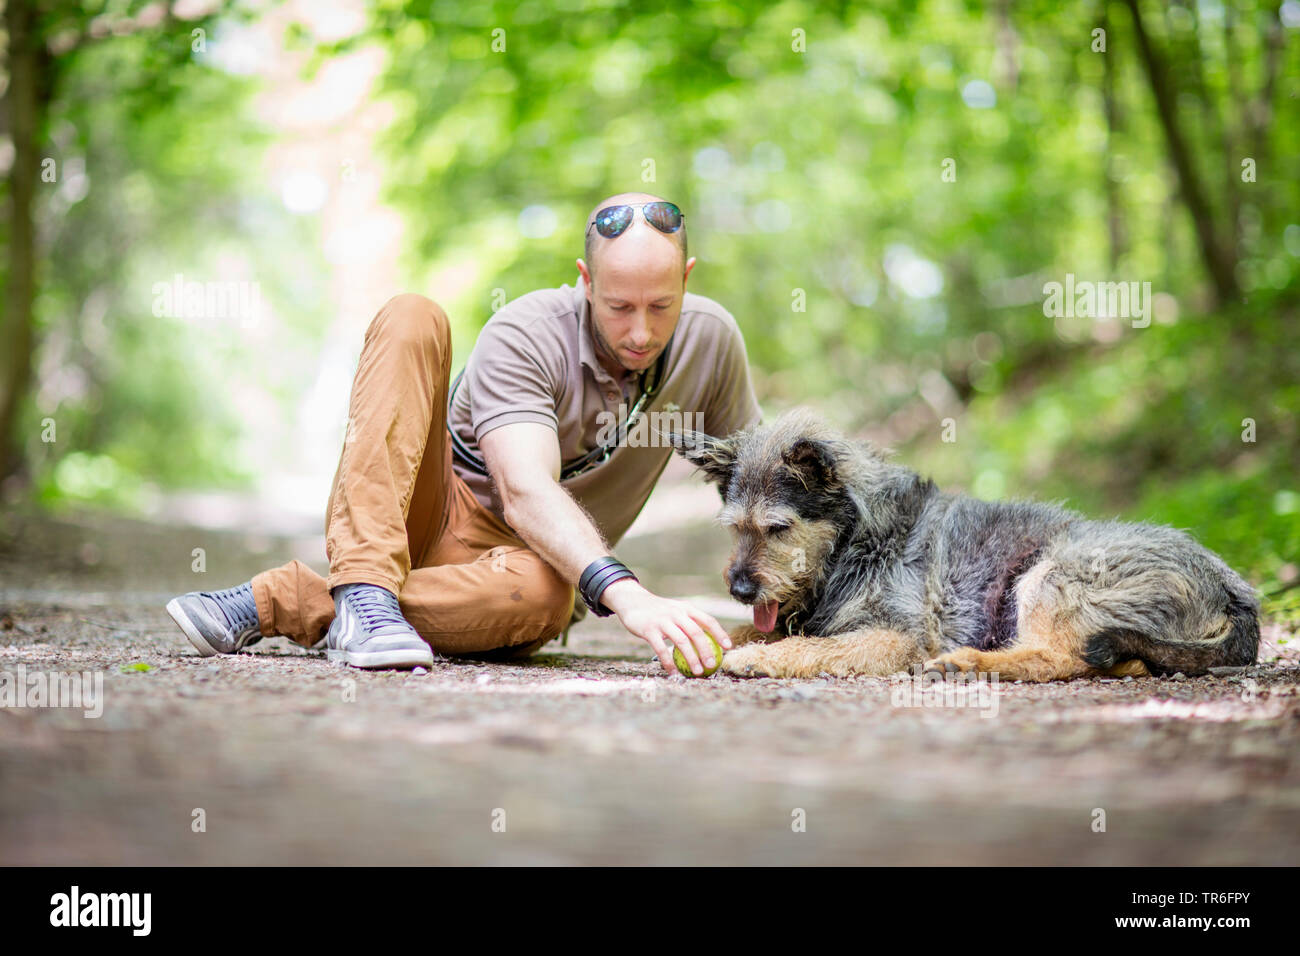 Berger de Picardie, Berger Picard (Canis lupus f. familiaris), man and dog sitting on a forest path, Germany Stock Photo